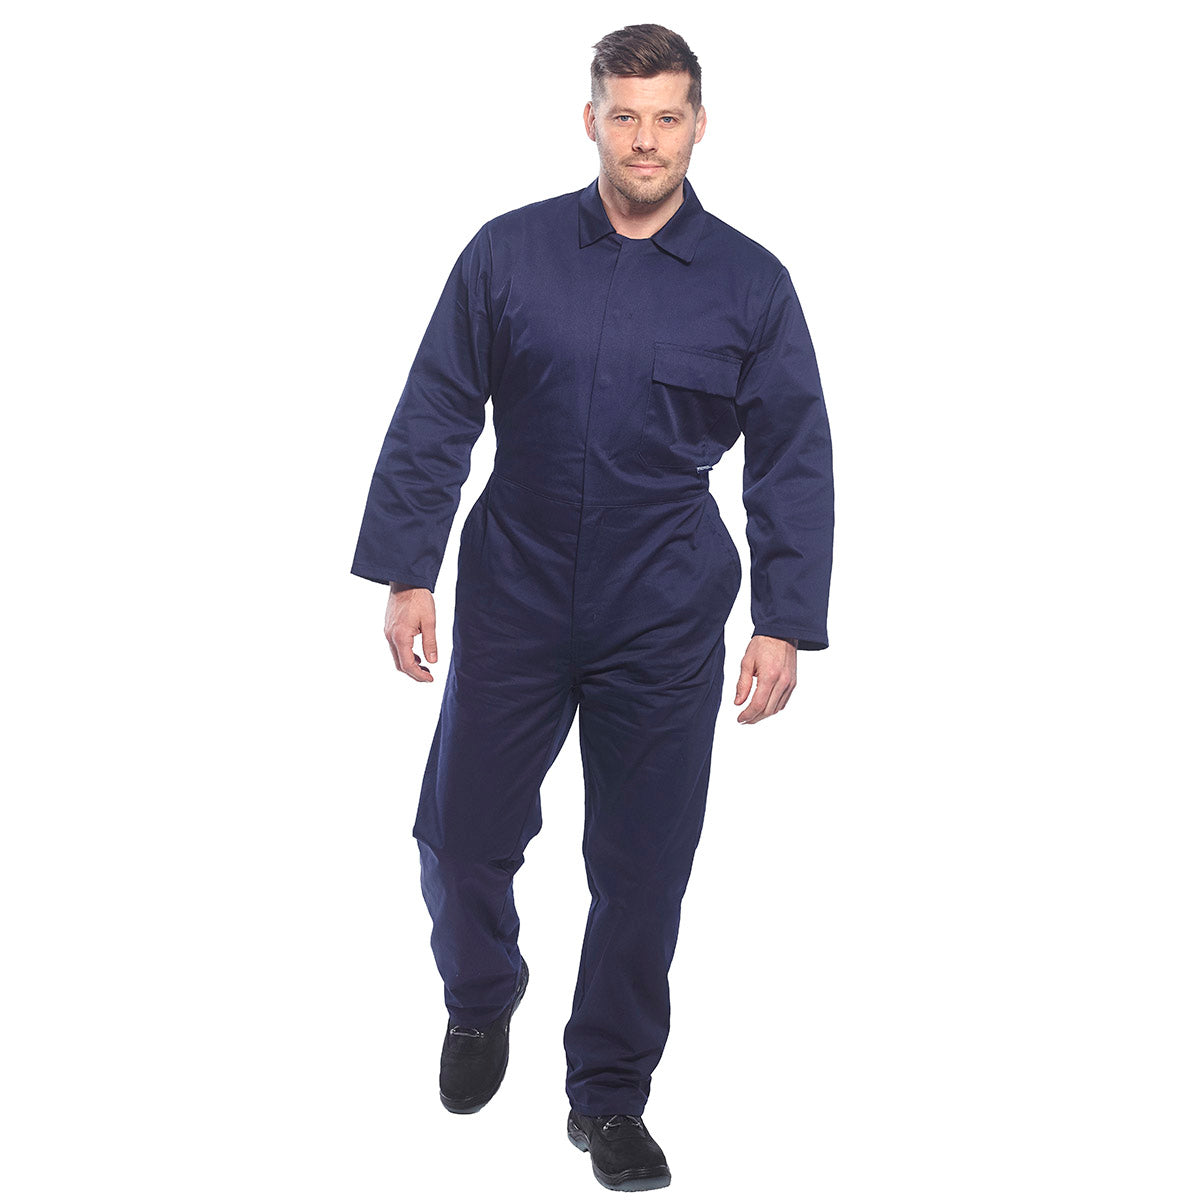 Portwest 2802 Standard Coverall Navy 2